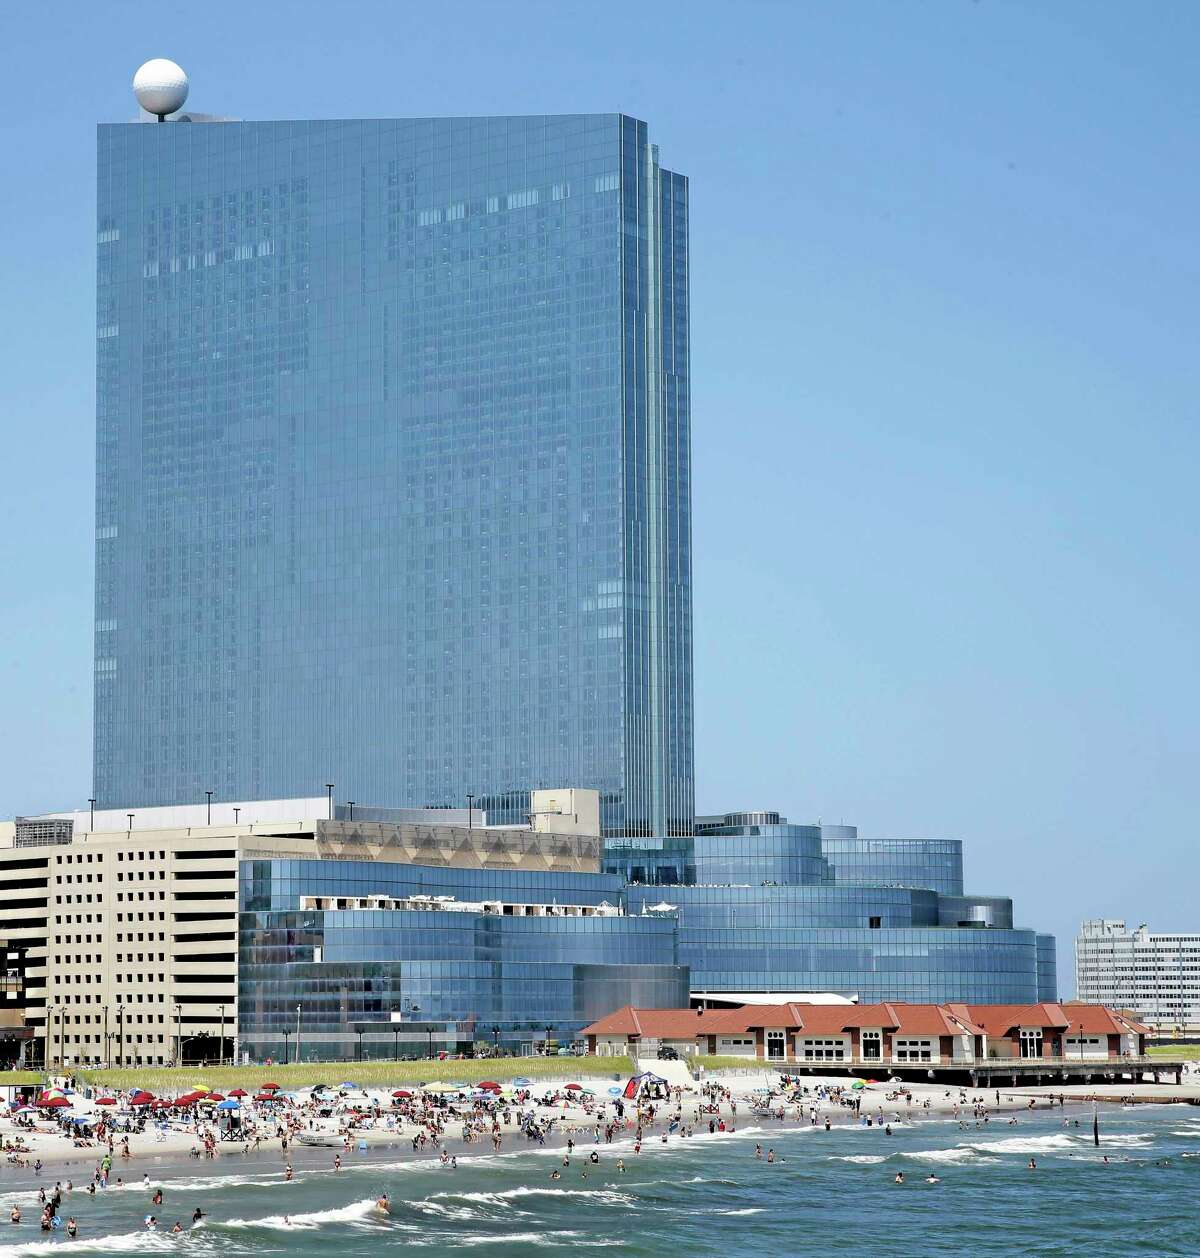 In this Wednesday July 23, 2014 photograph, the Revel Casino Hotel is seen in Atlantic City, N.J. The Revel Casino Hotel will close its doors on Sept. 10, 2014 after failing to find a buyer in bankruptcy court, company officials announced Tuesday, Aug. 12, 2014. (AP Photo/Mel Evans)